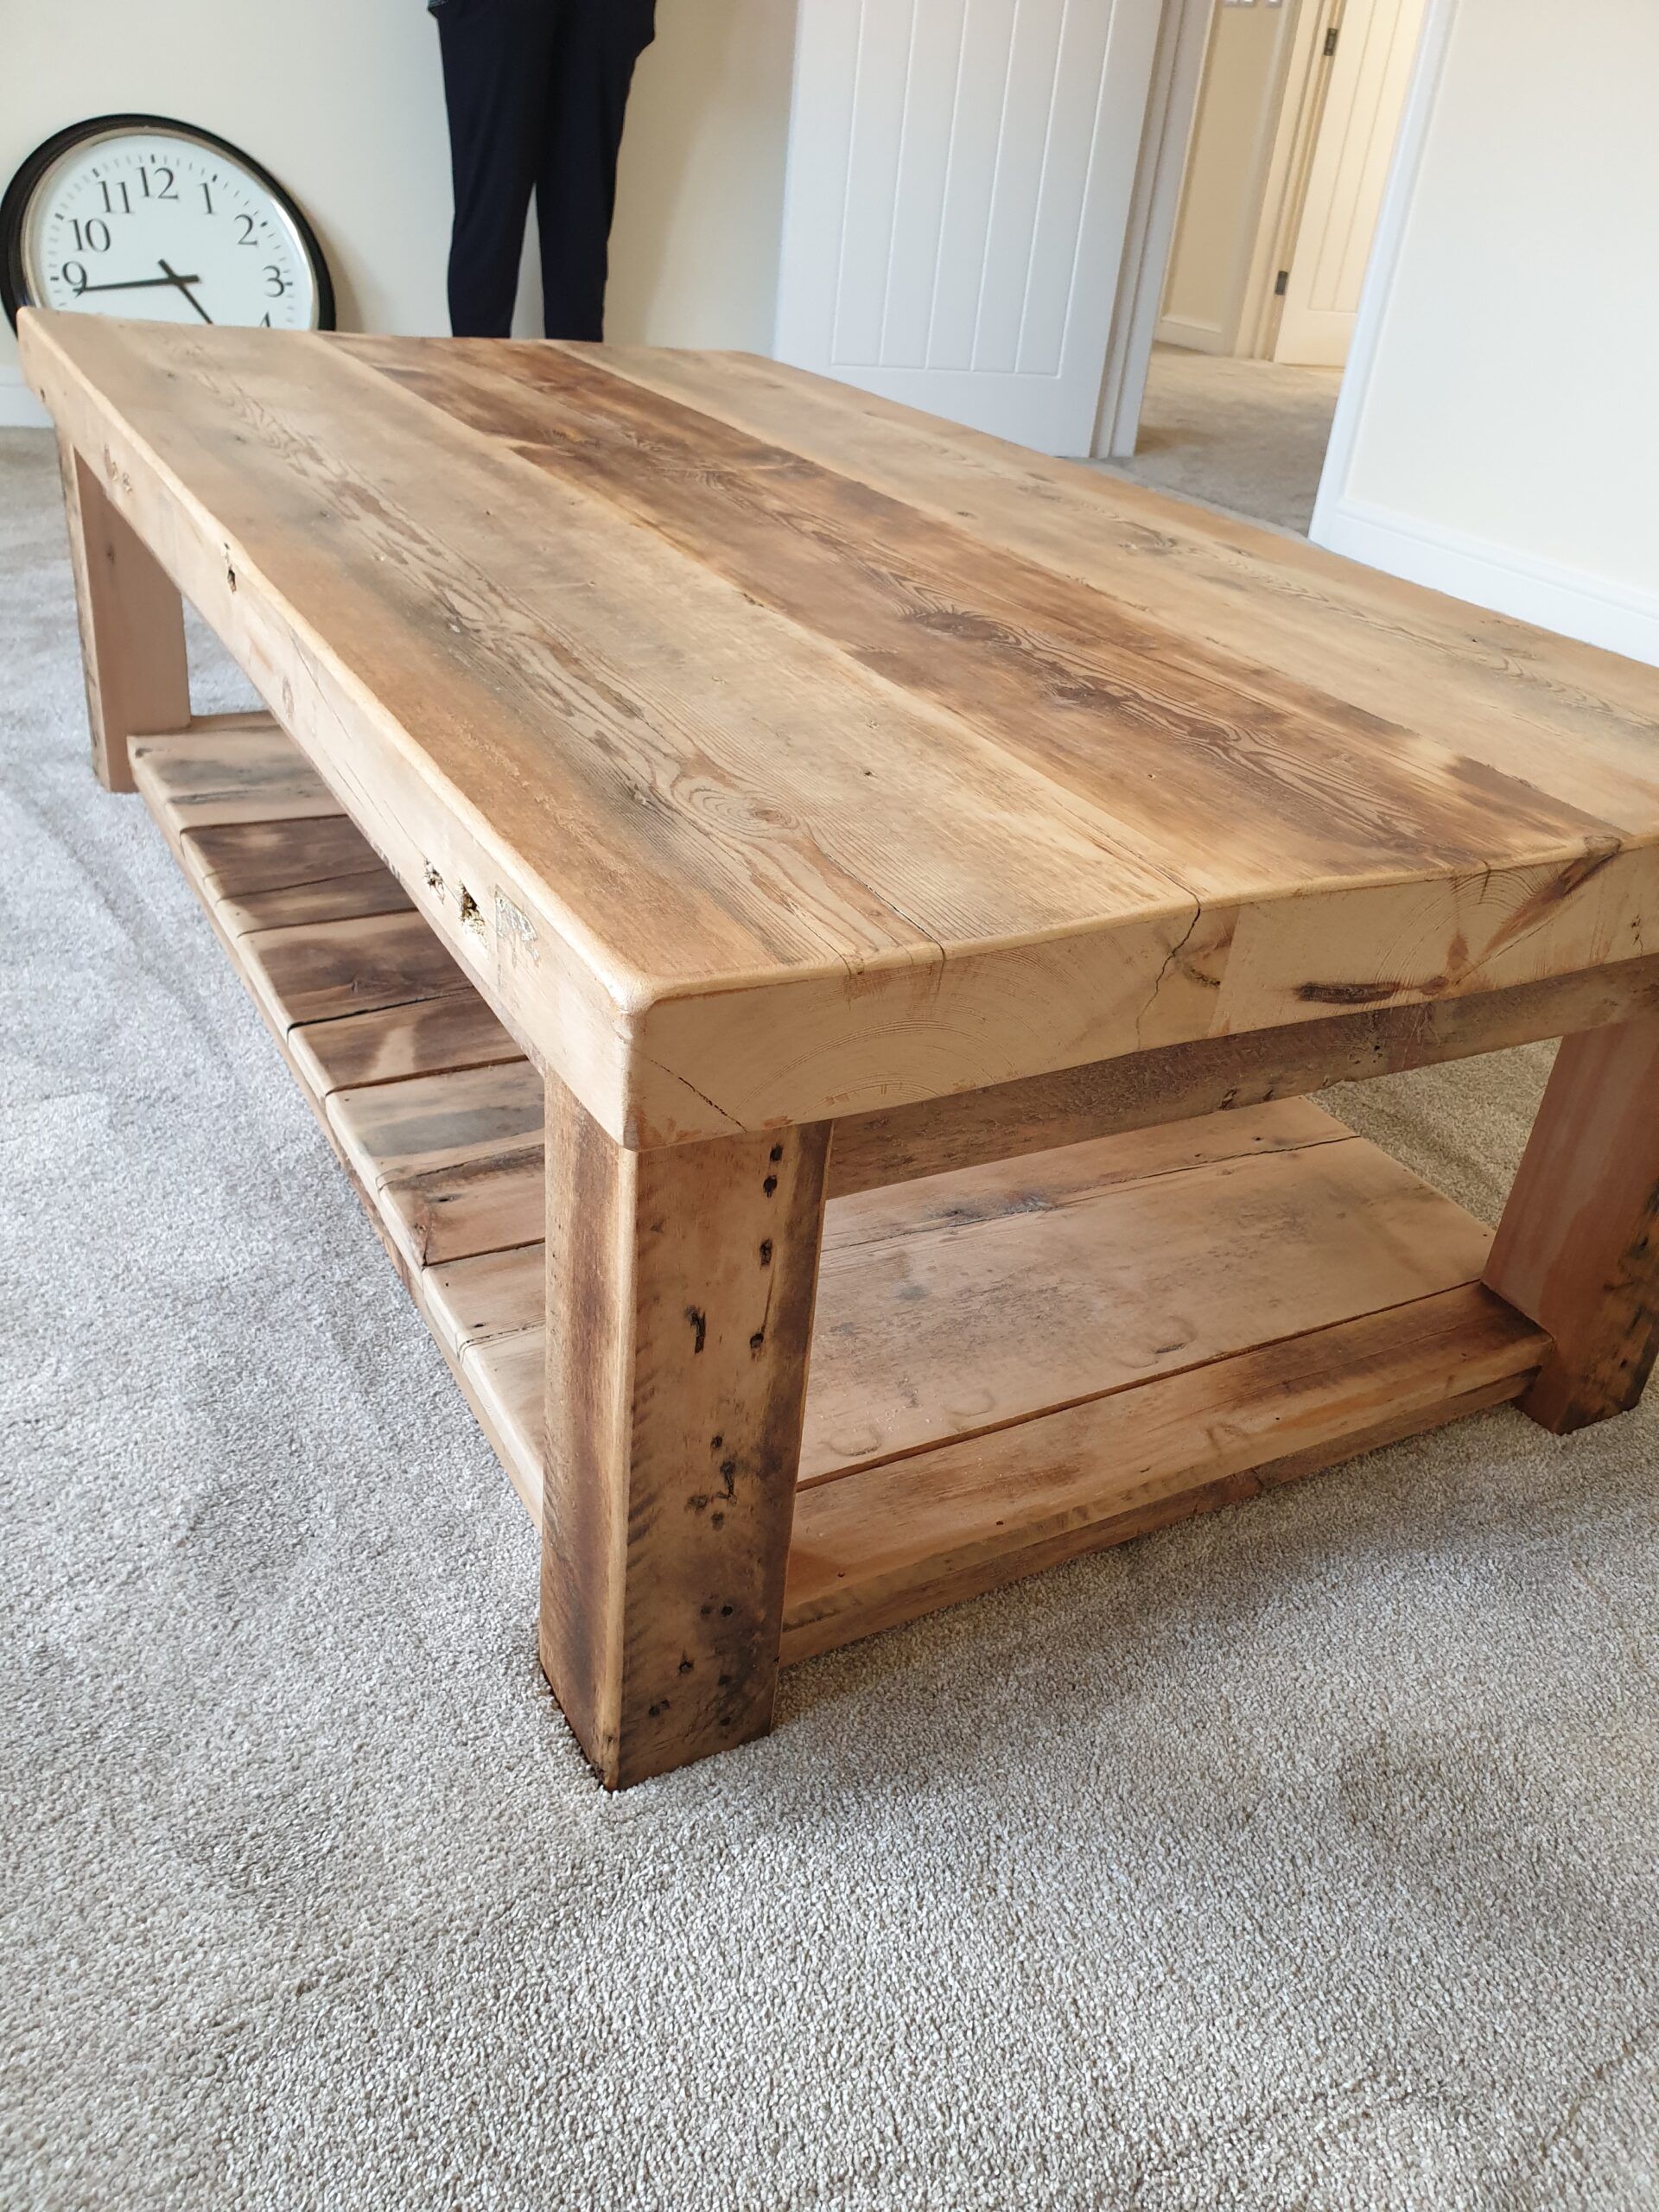 Buy Rustic Wood Coffee Table Made From Reclaimed Timber With Rustic Wood Coffee Tables (View 2 of 21)